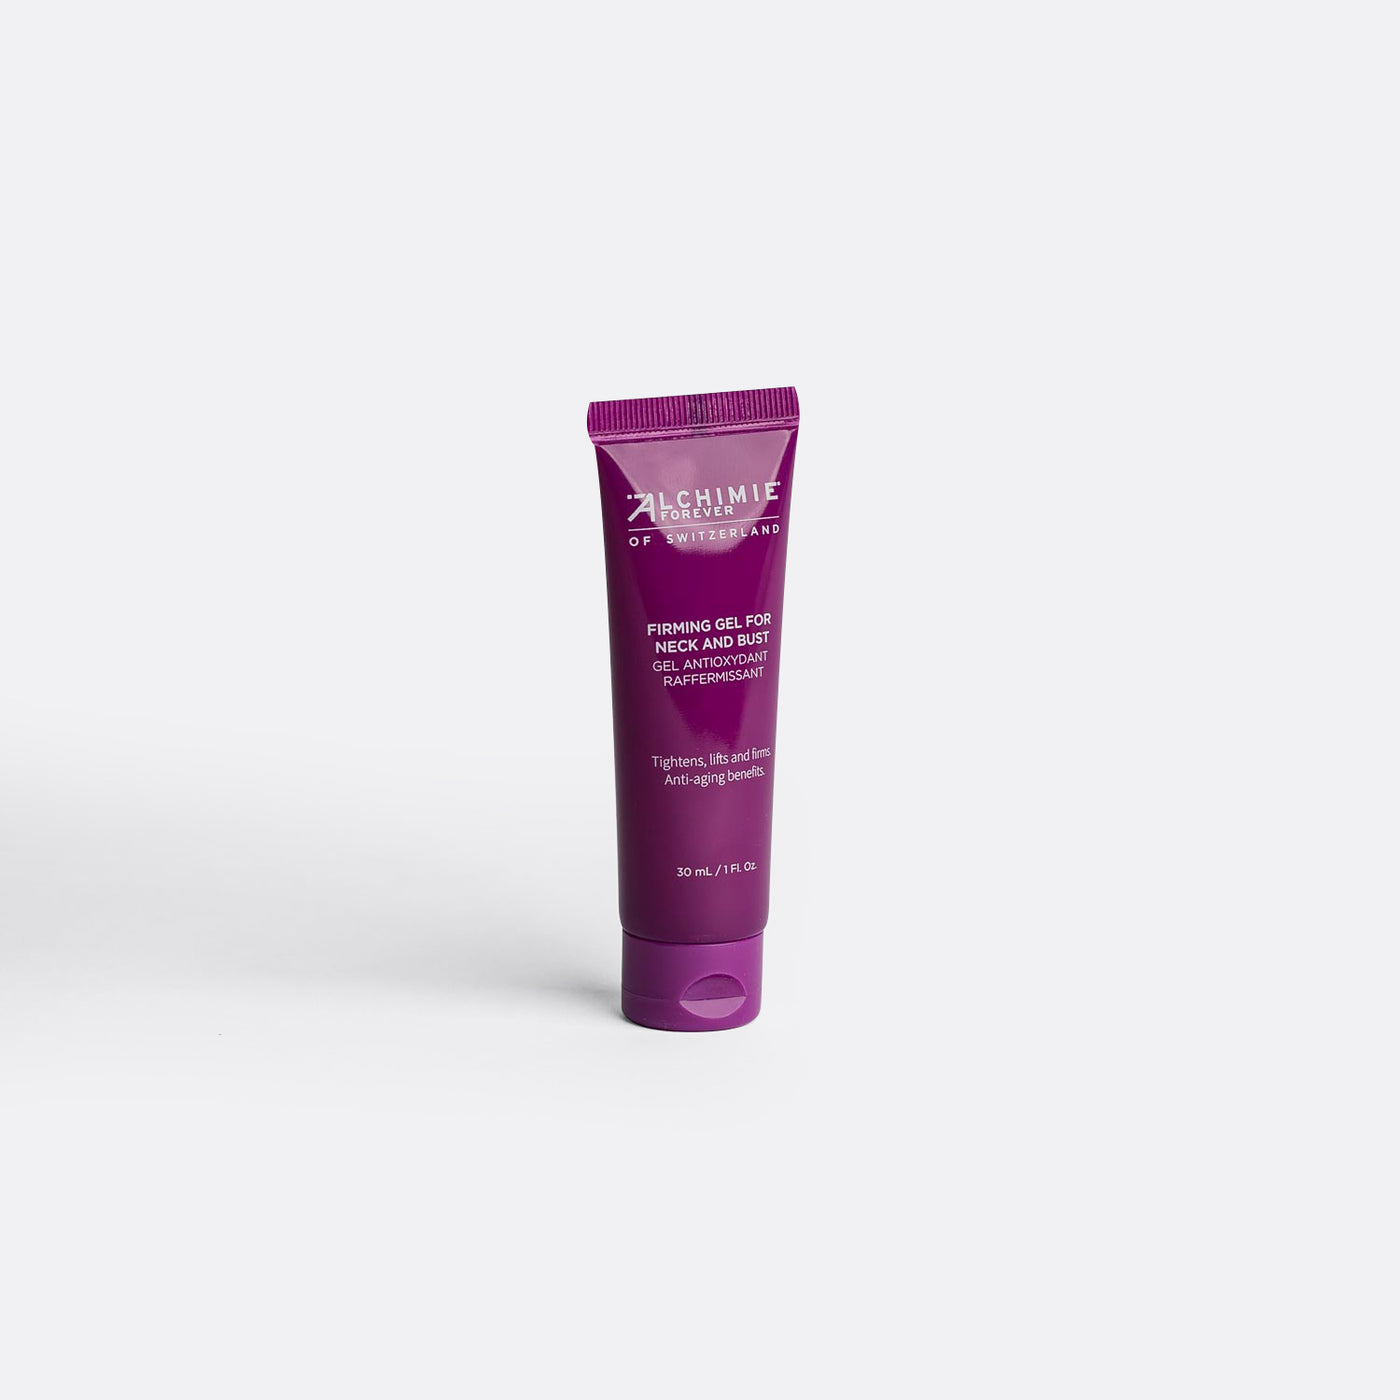 Alchimie Forever Firming Gel For Neck and Bust Travel Size